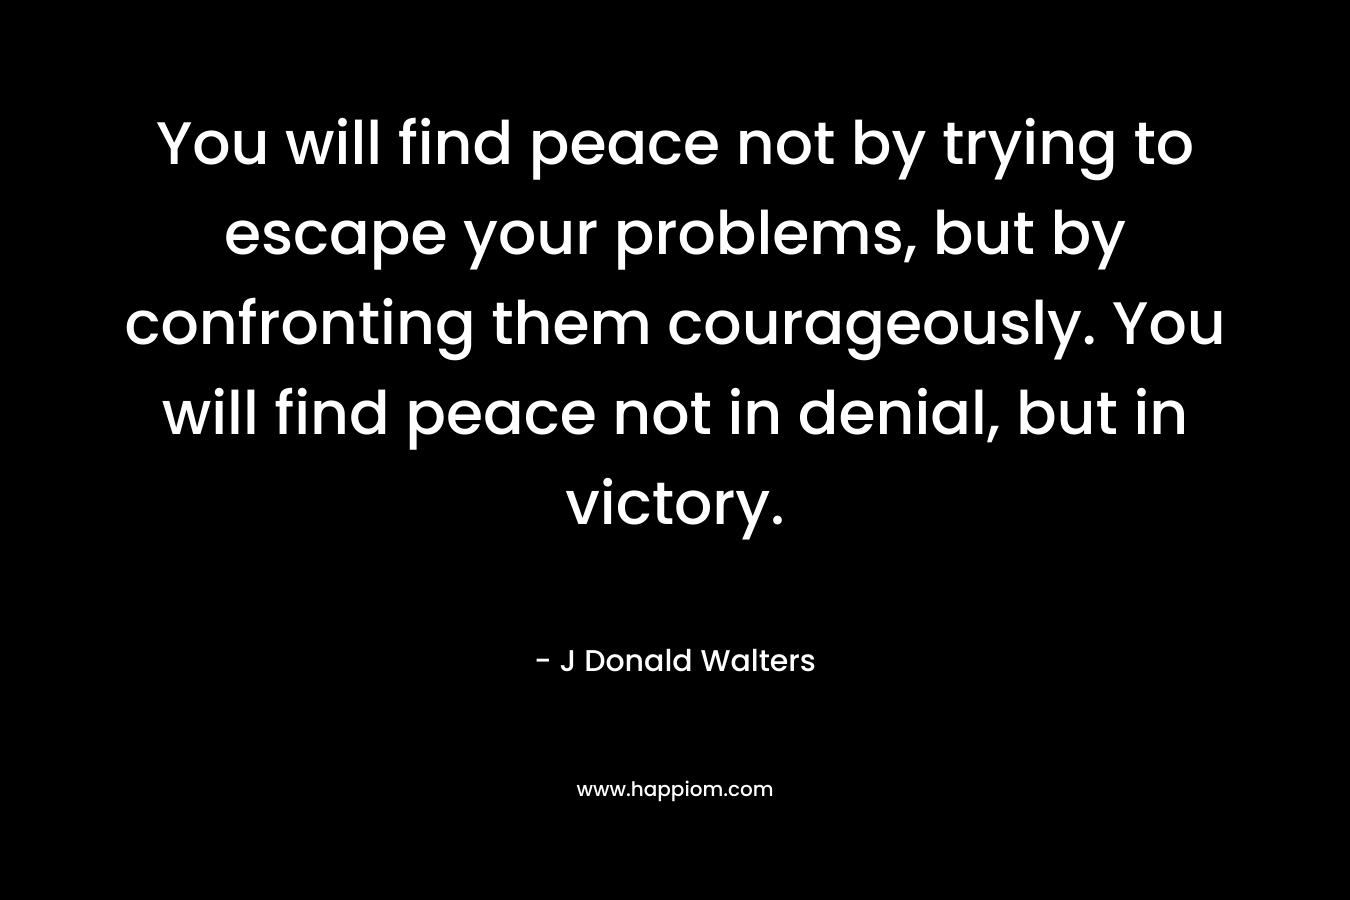 You will find peace not by trying to escape your problems, but by confronting them courageously. You will find peace not in denial, but in victory.